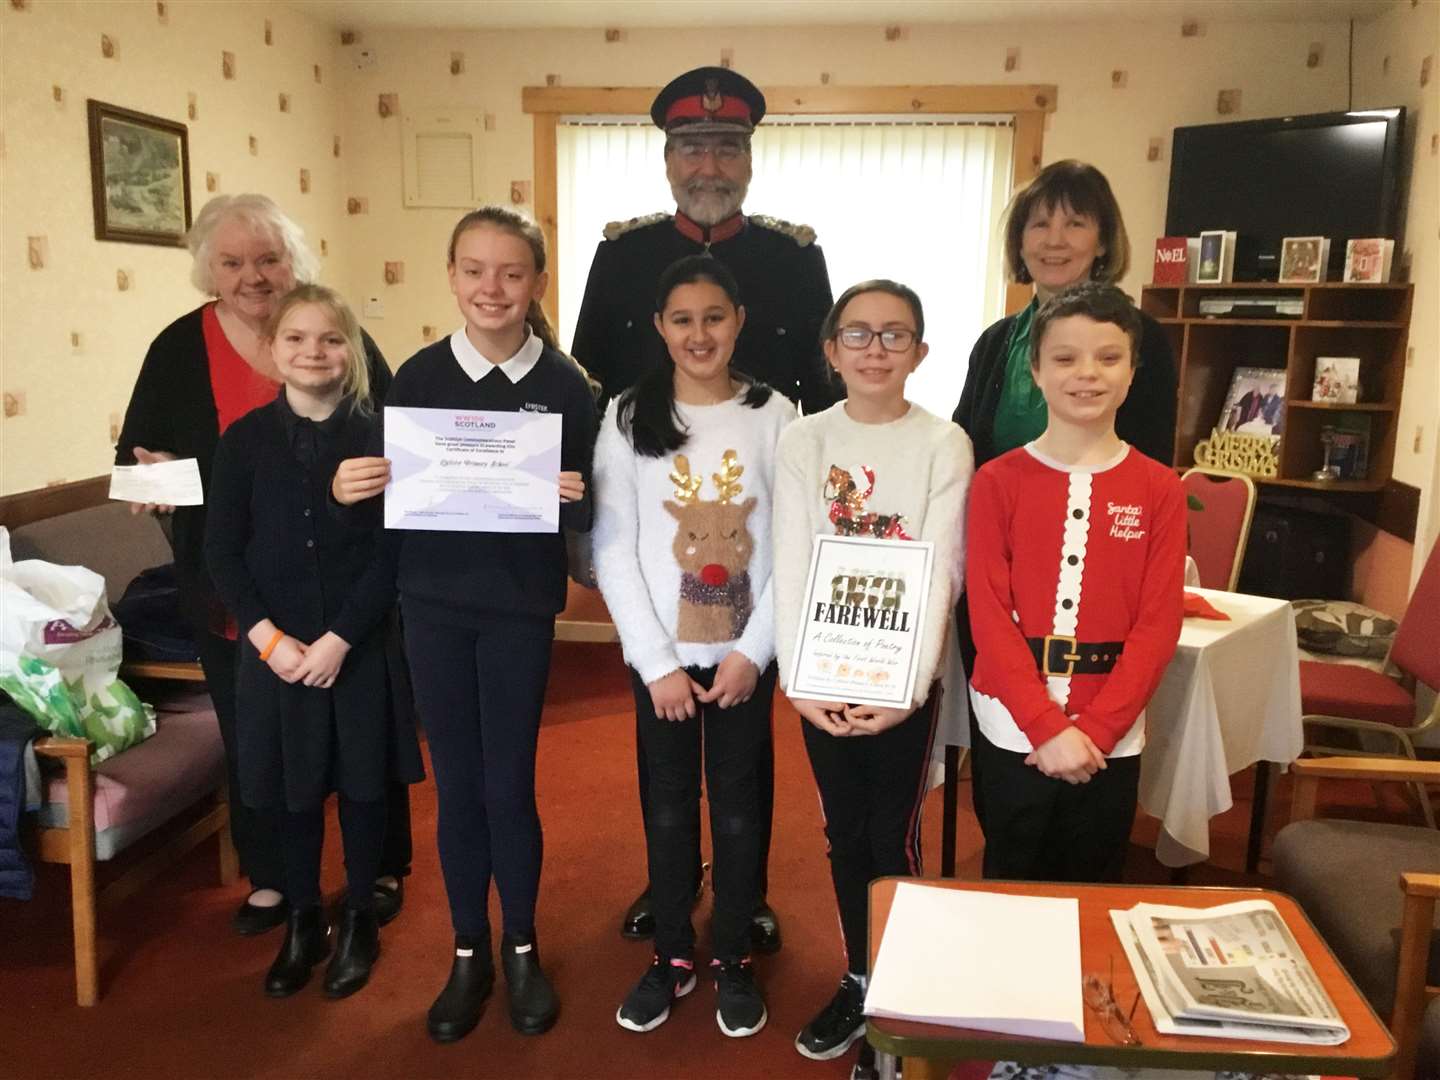 Back row: Chrissie Polson, vice-chairperson at the Lybster Centre; Lord-Lieutenant John Thurso; and Carol Grant, head teacher. In front are pupils Blythe Bullen, Kirsty Young, Saffiya Amin, Charlotte Garrett-Atkins and Tristan Stuart.